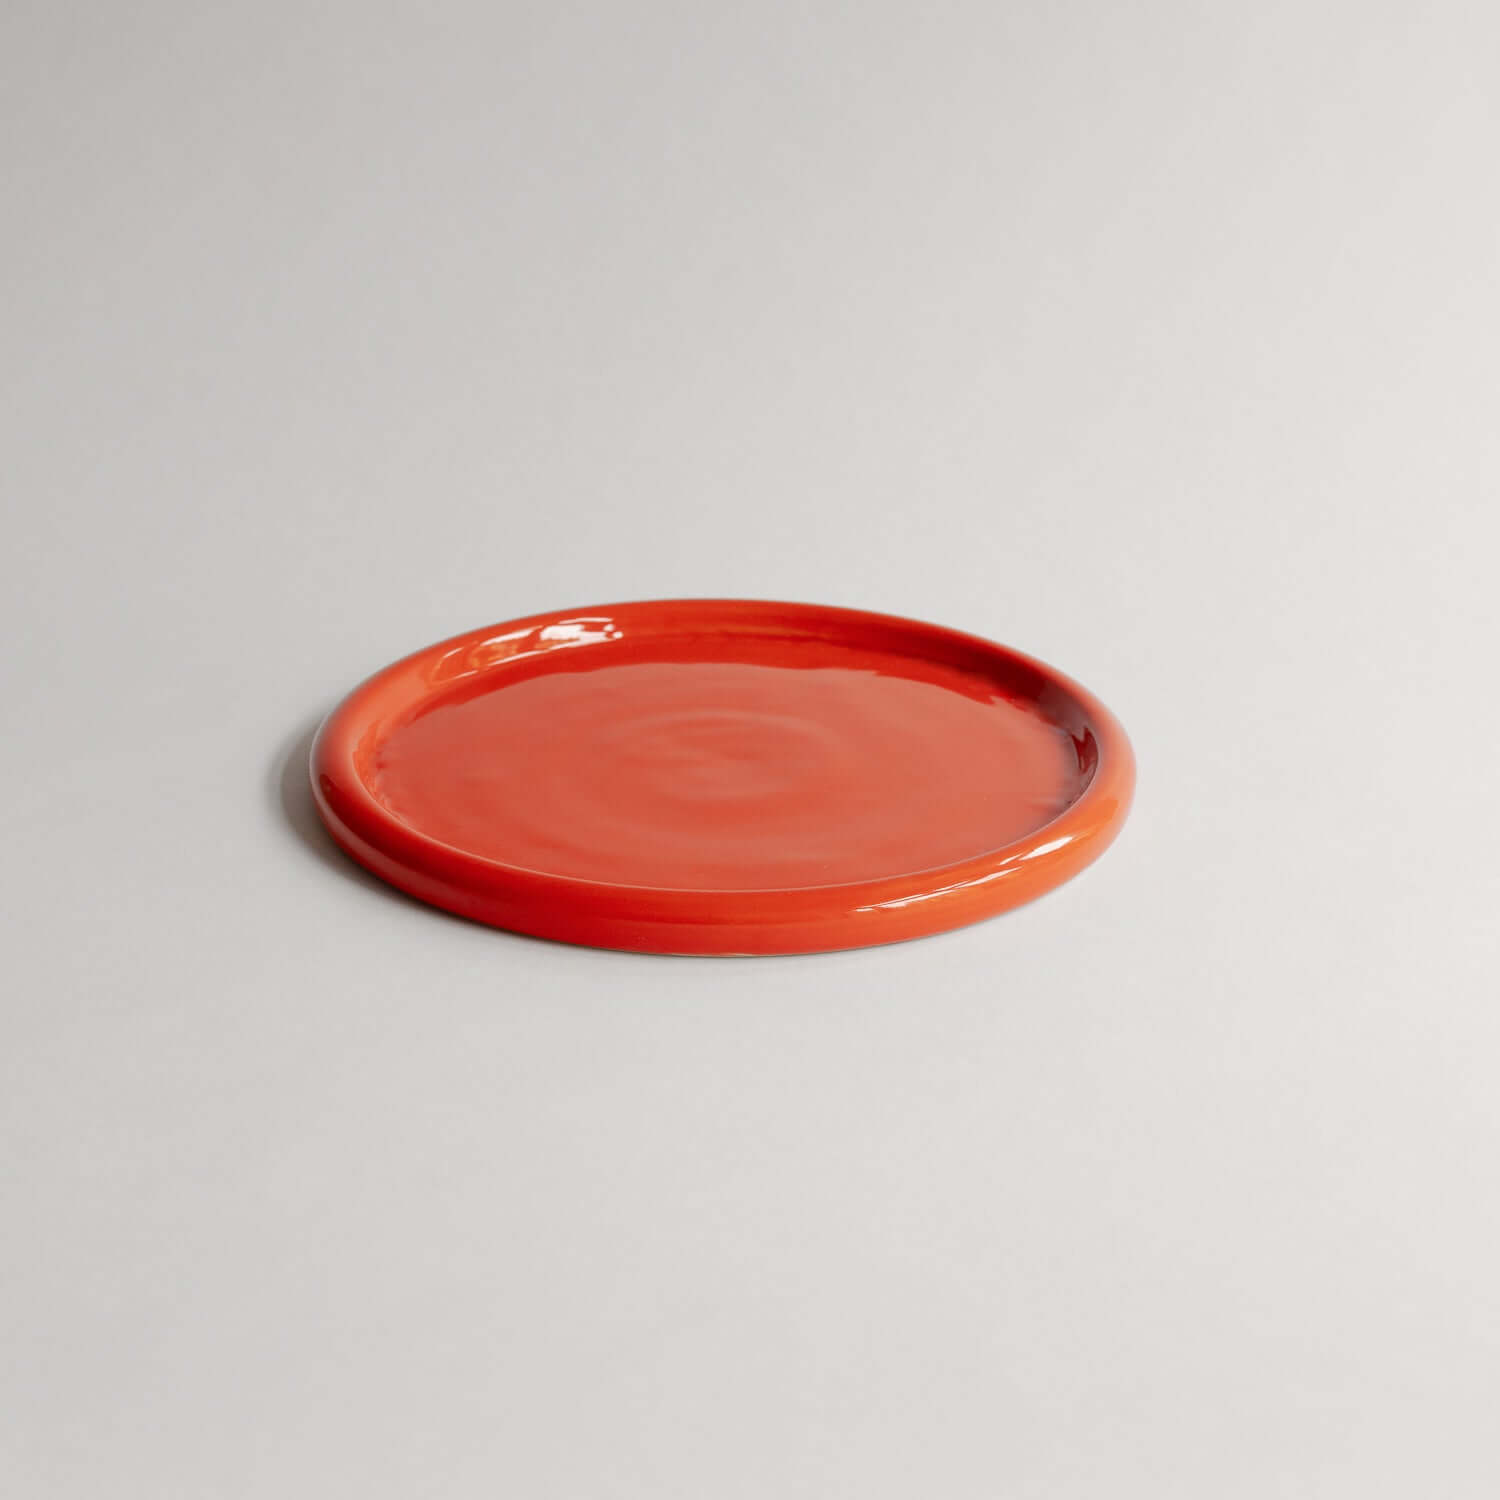 Elevate your dining with the Aleah Plate Set. Handmade red & creme ceramic plates with a 19cm diameter, perfect for lively table settings. Shop now! von viola beuscher ceramics